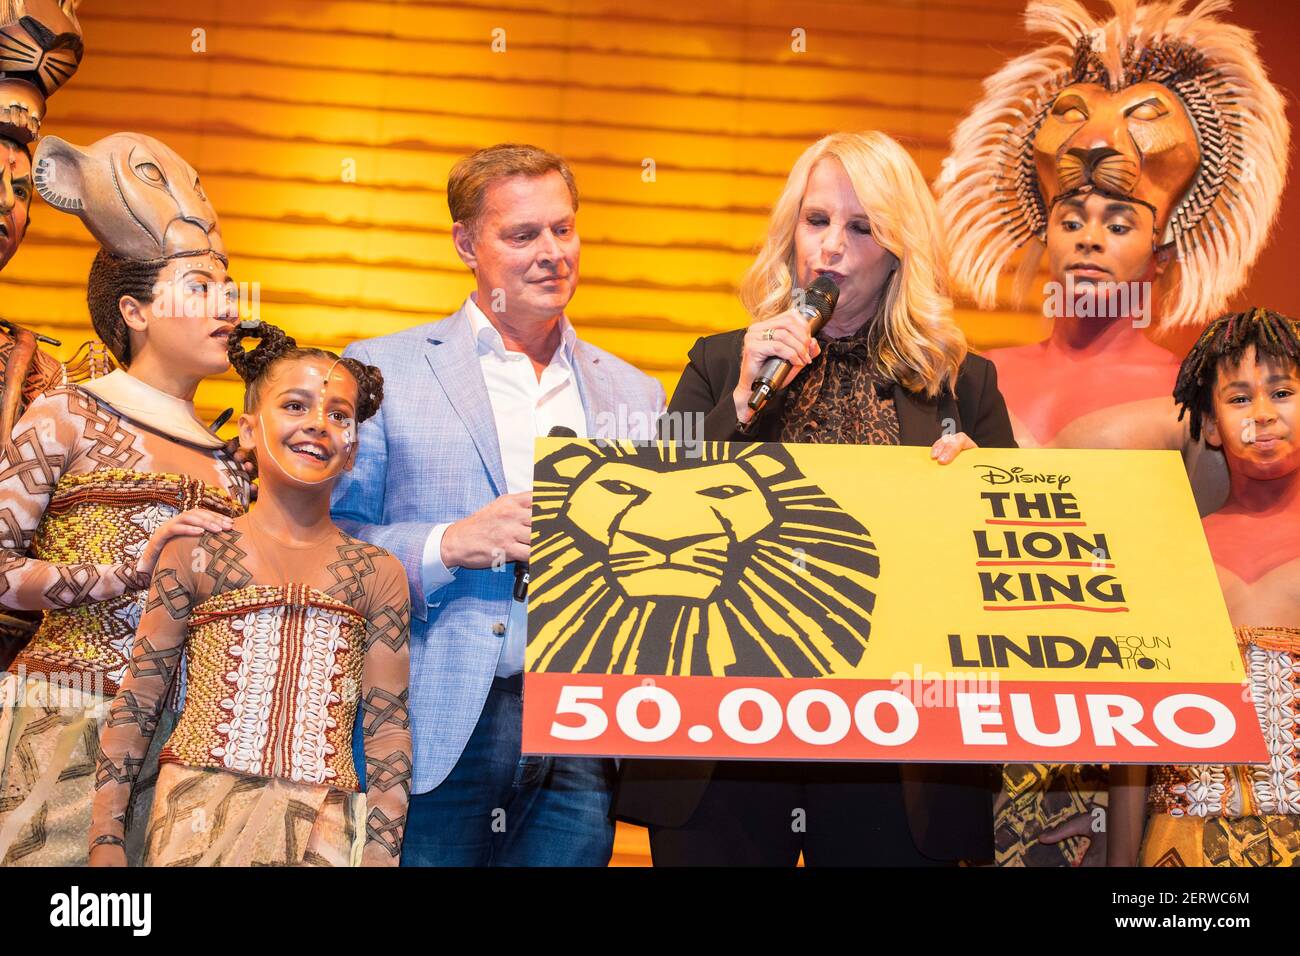 residu vloeistof Buitensporig Albert Verlinde and Linda de Mol during the second anniversary of The Lion  King at the AFAS Circus Theater in Scheveningen, the LINDA.foundation by  Linda de Mol will receive a €50,000 checue. (